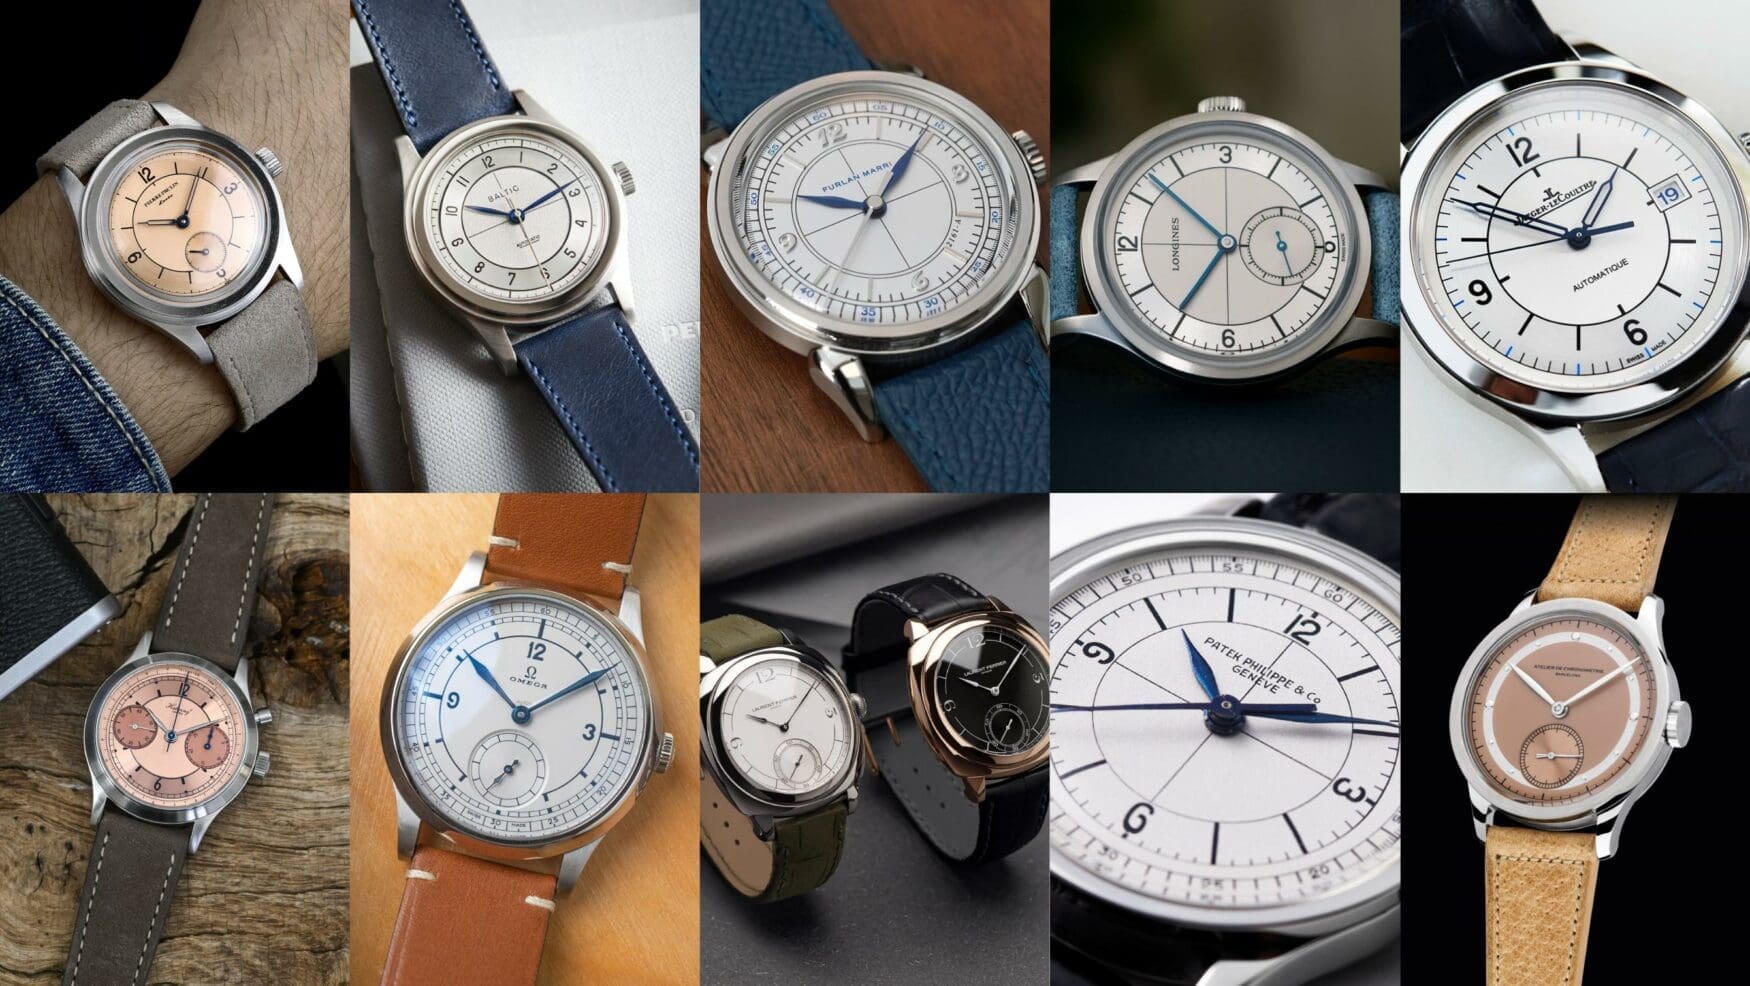 The 10 best sector dials watches